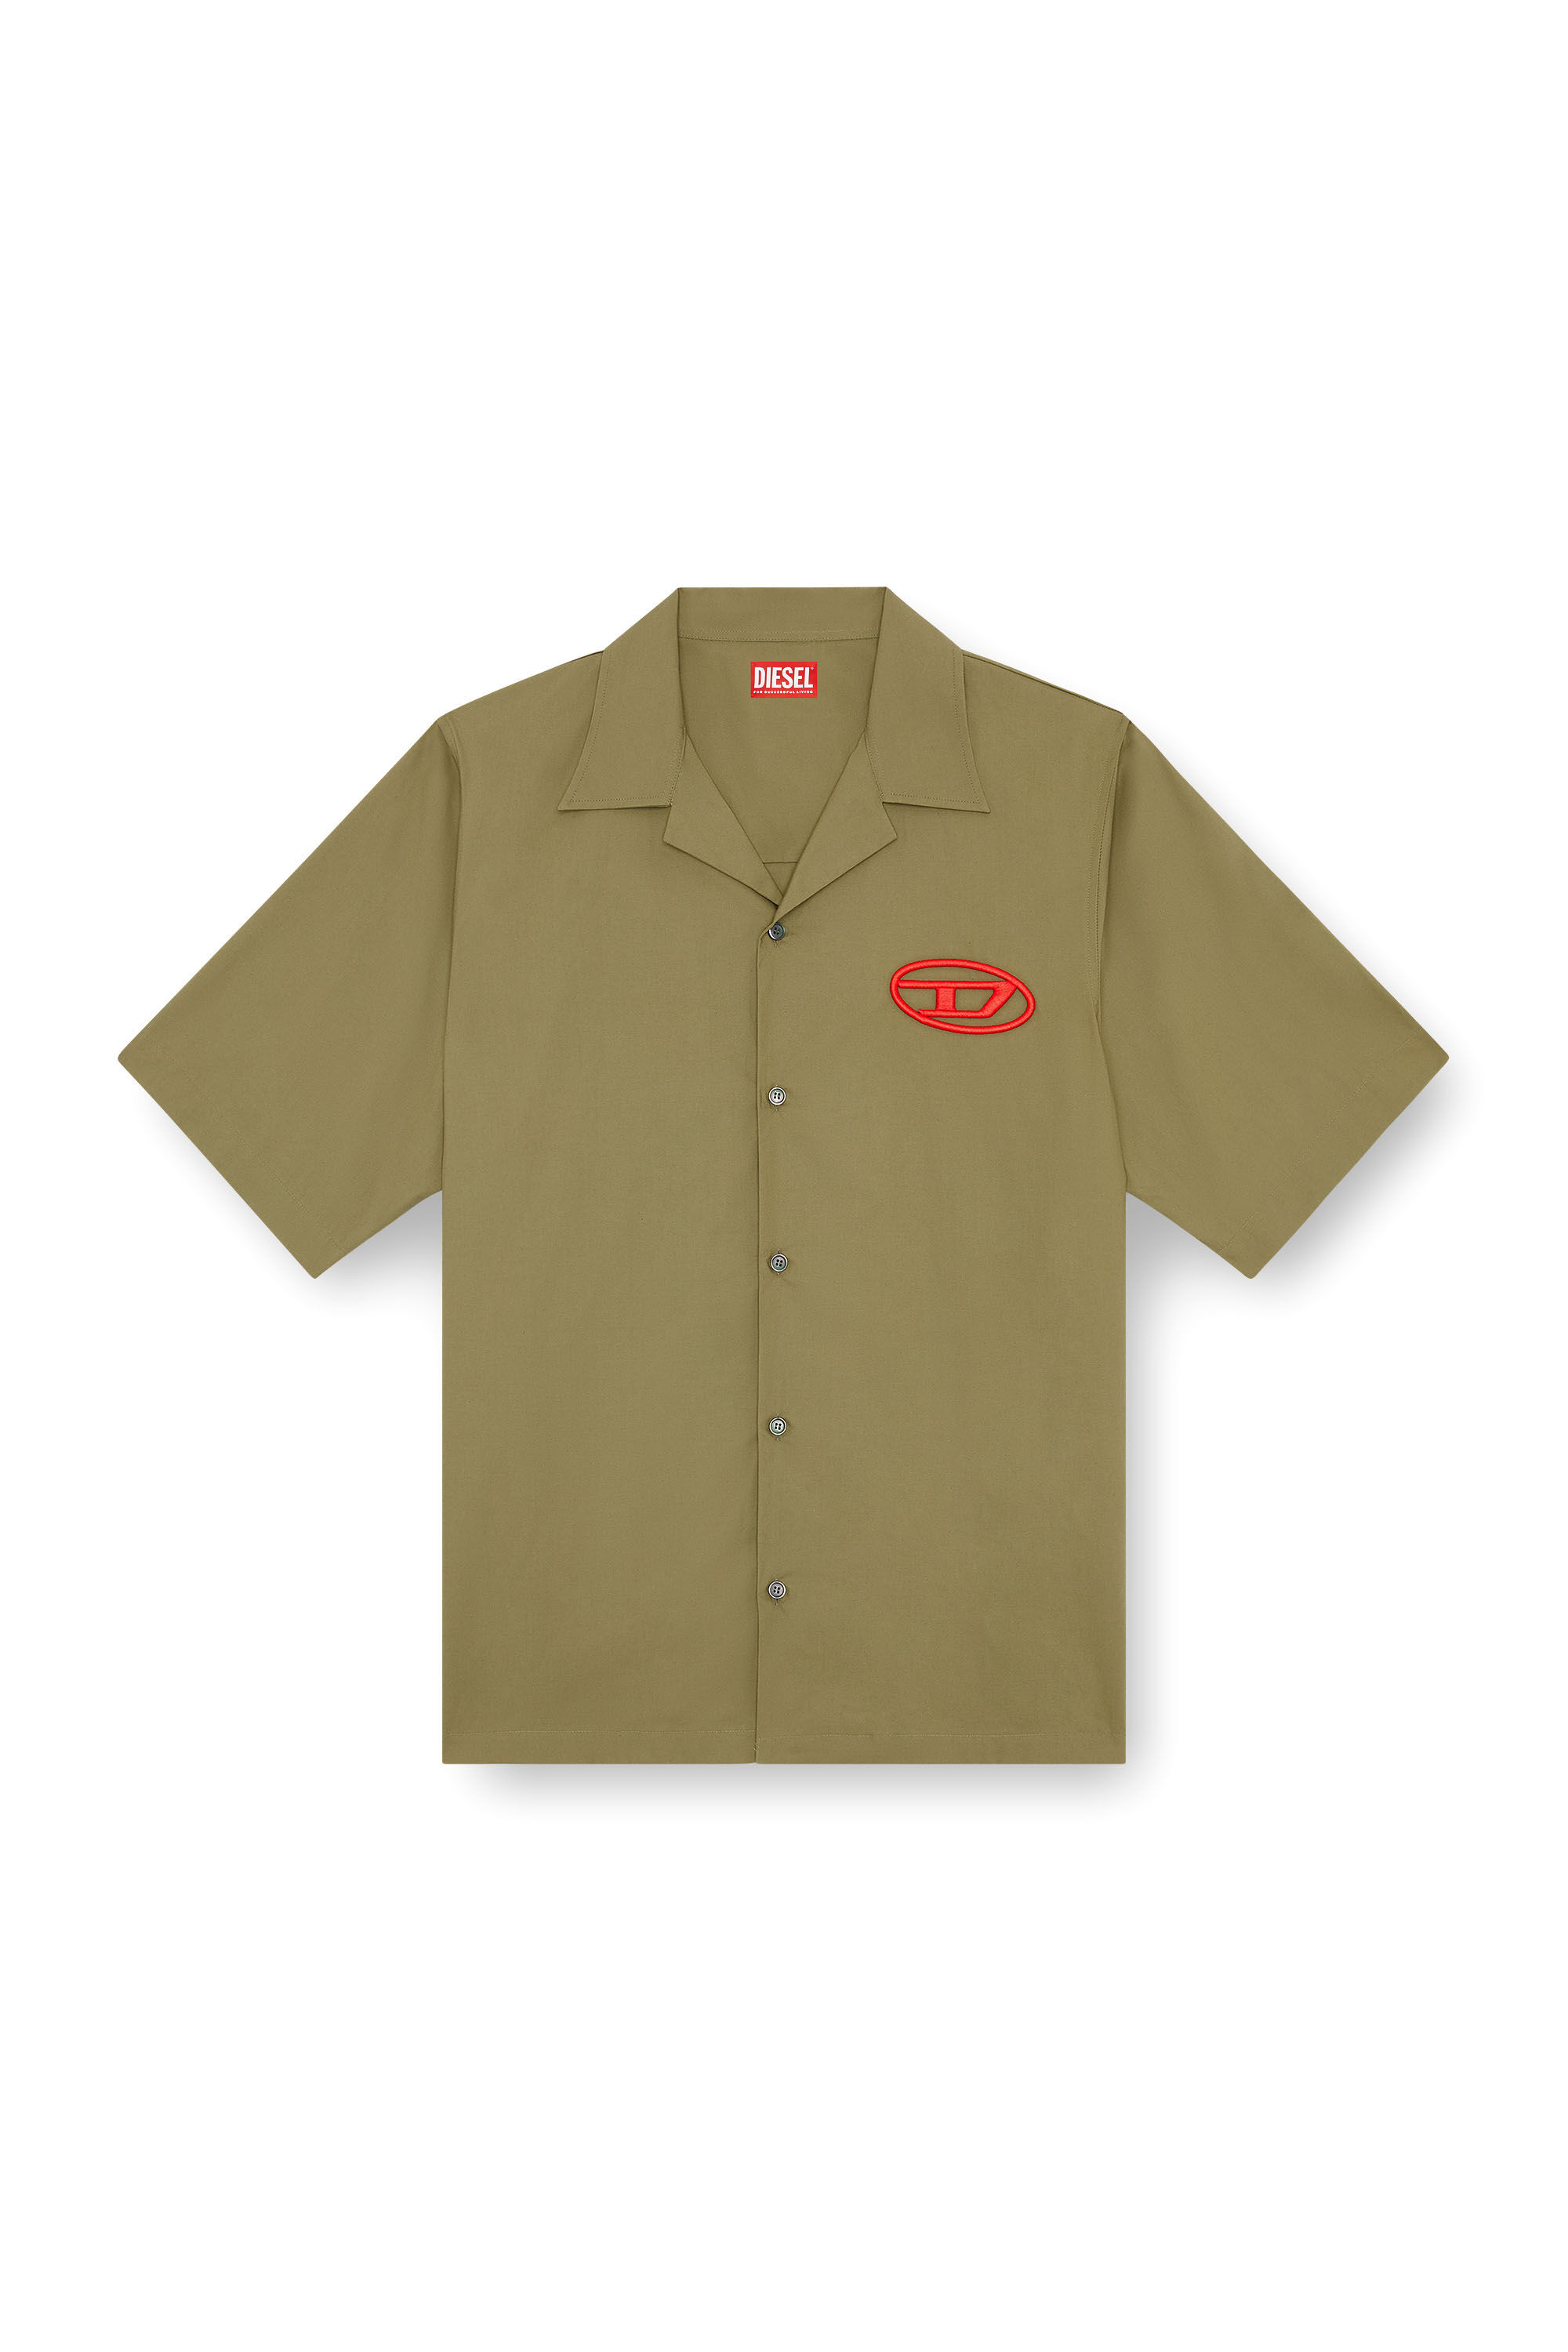 Diesel - S-MAC-C, Man Bowling shirt with logo embroidery in Green - Image 2